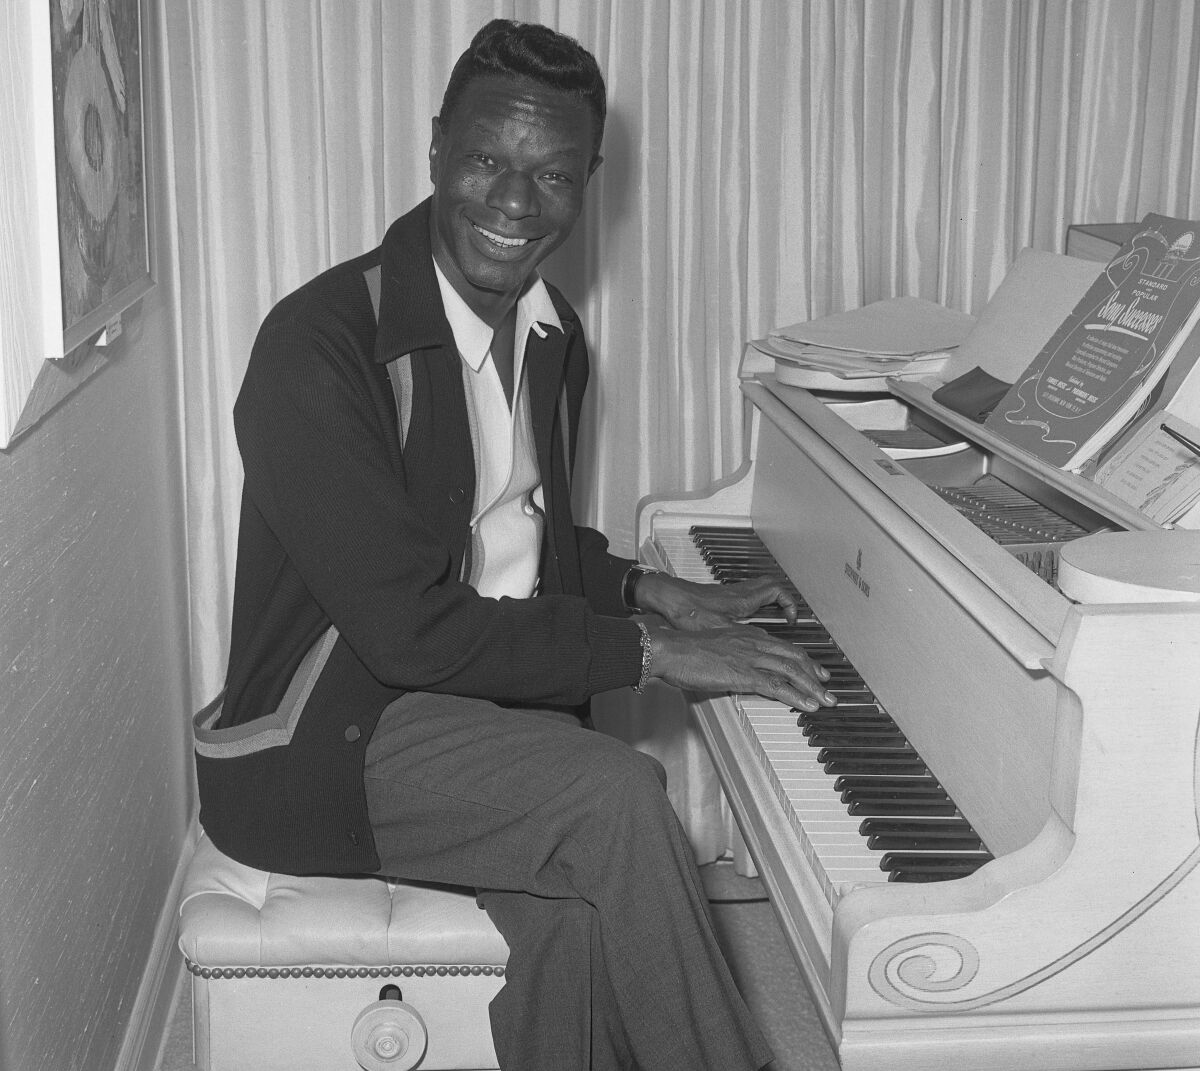 Nat King Cole smiles while seated at a piano.